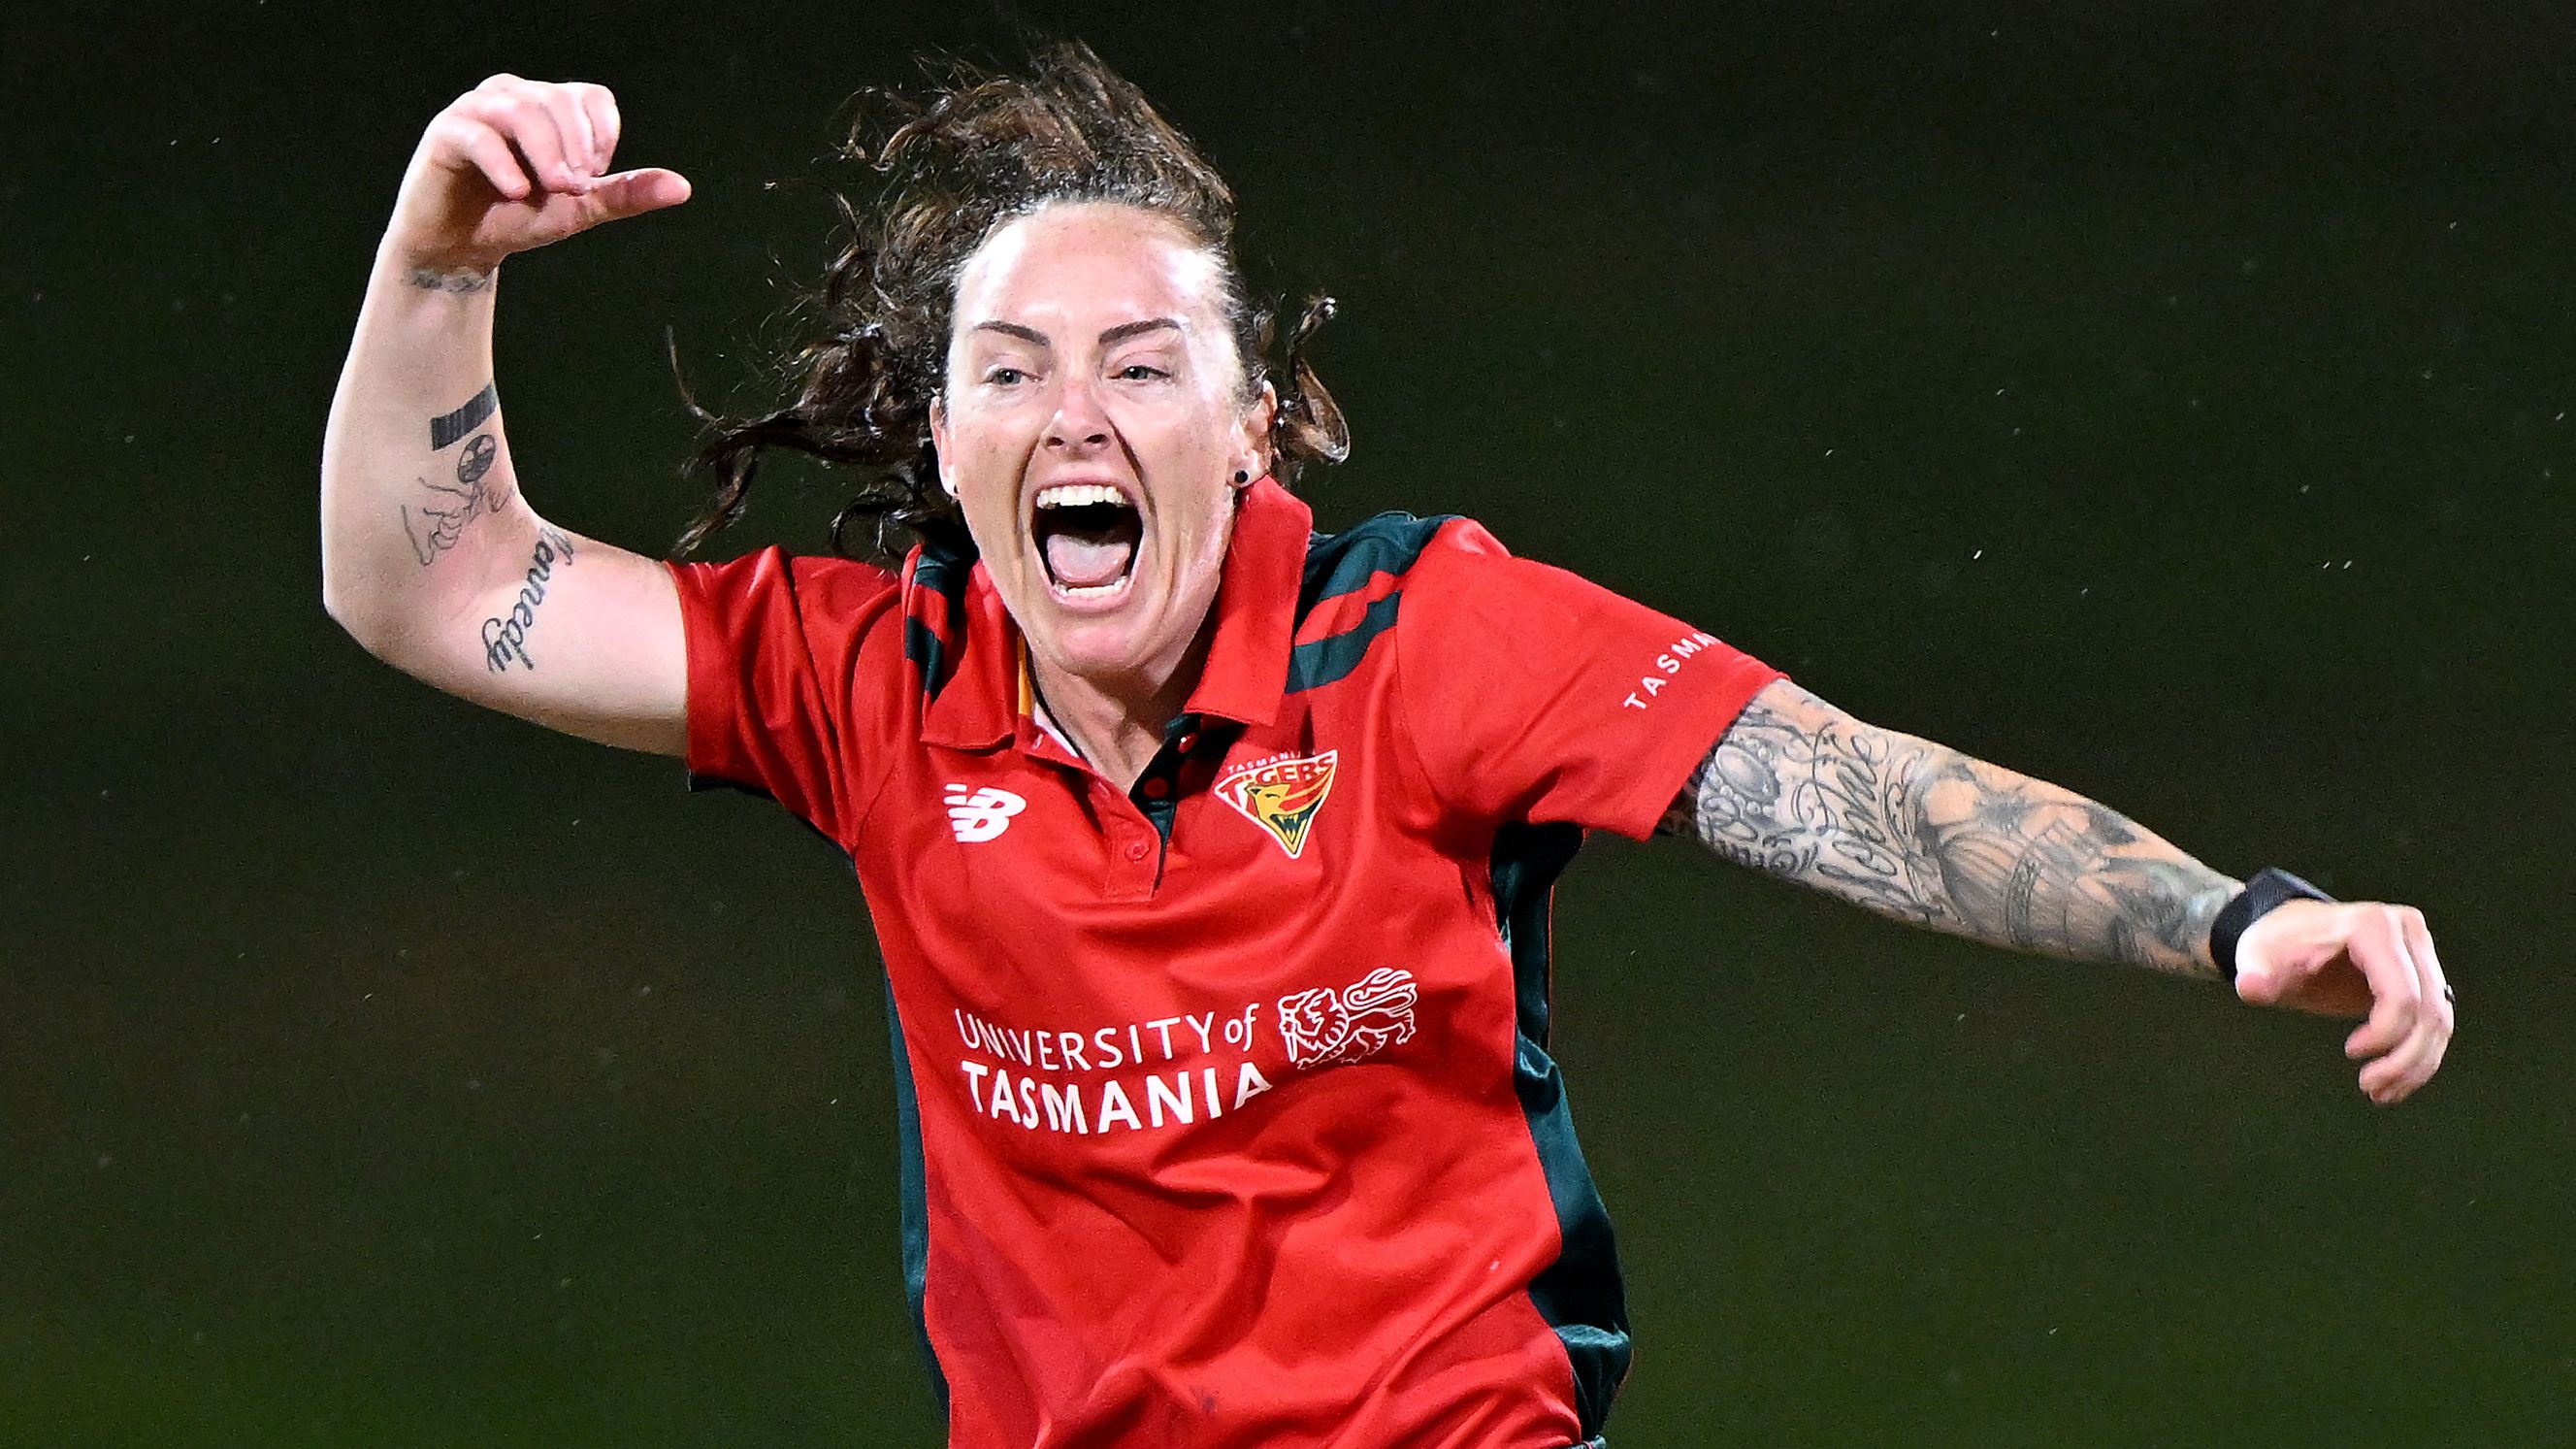 Sarah Coyte of the Tigers celebrates the wicket of Ella Wilson of the Scorpions during the WNCL Final match between Tasmania and South Australia at Blundstone Arena, on February 25, 2023, in Hobart, Australia. (Photo by Steve Bell/Getty Images)